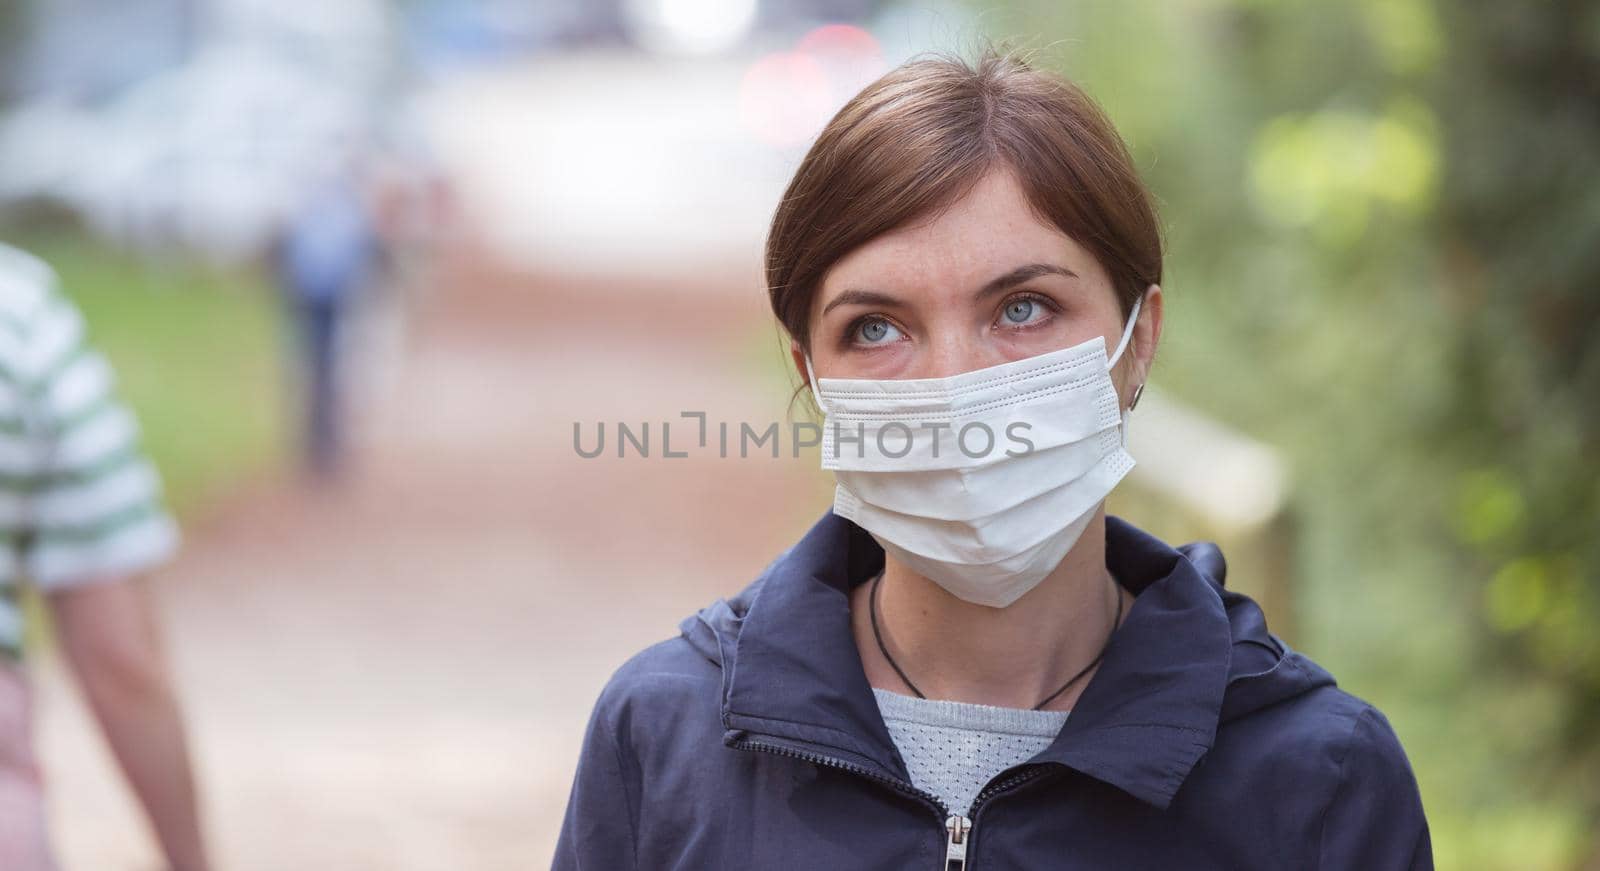 Flue and corona safety concept. Woman wearing face mask to protect herself, outdoors by Daxenbichler